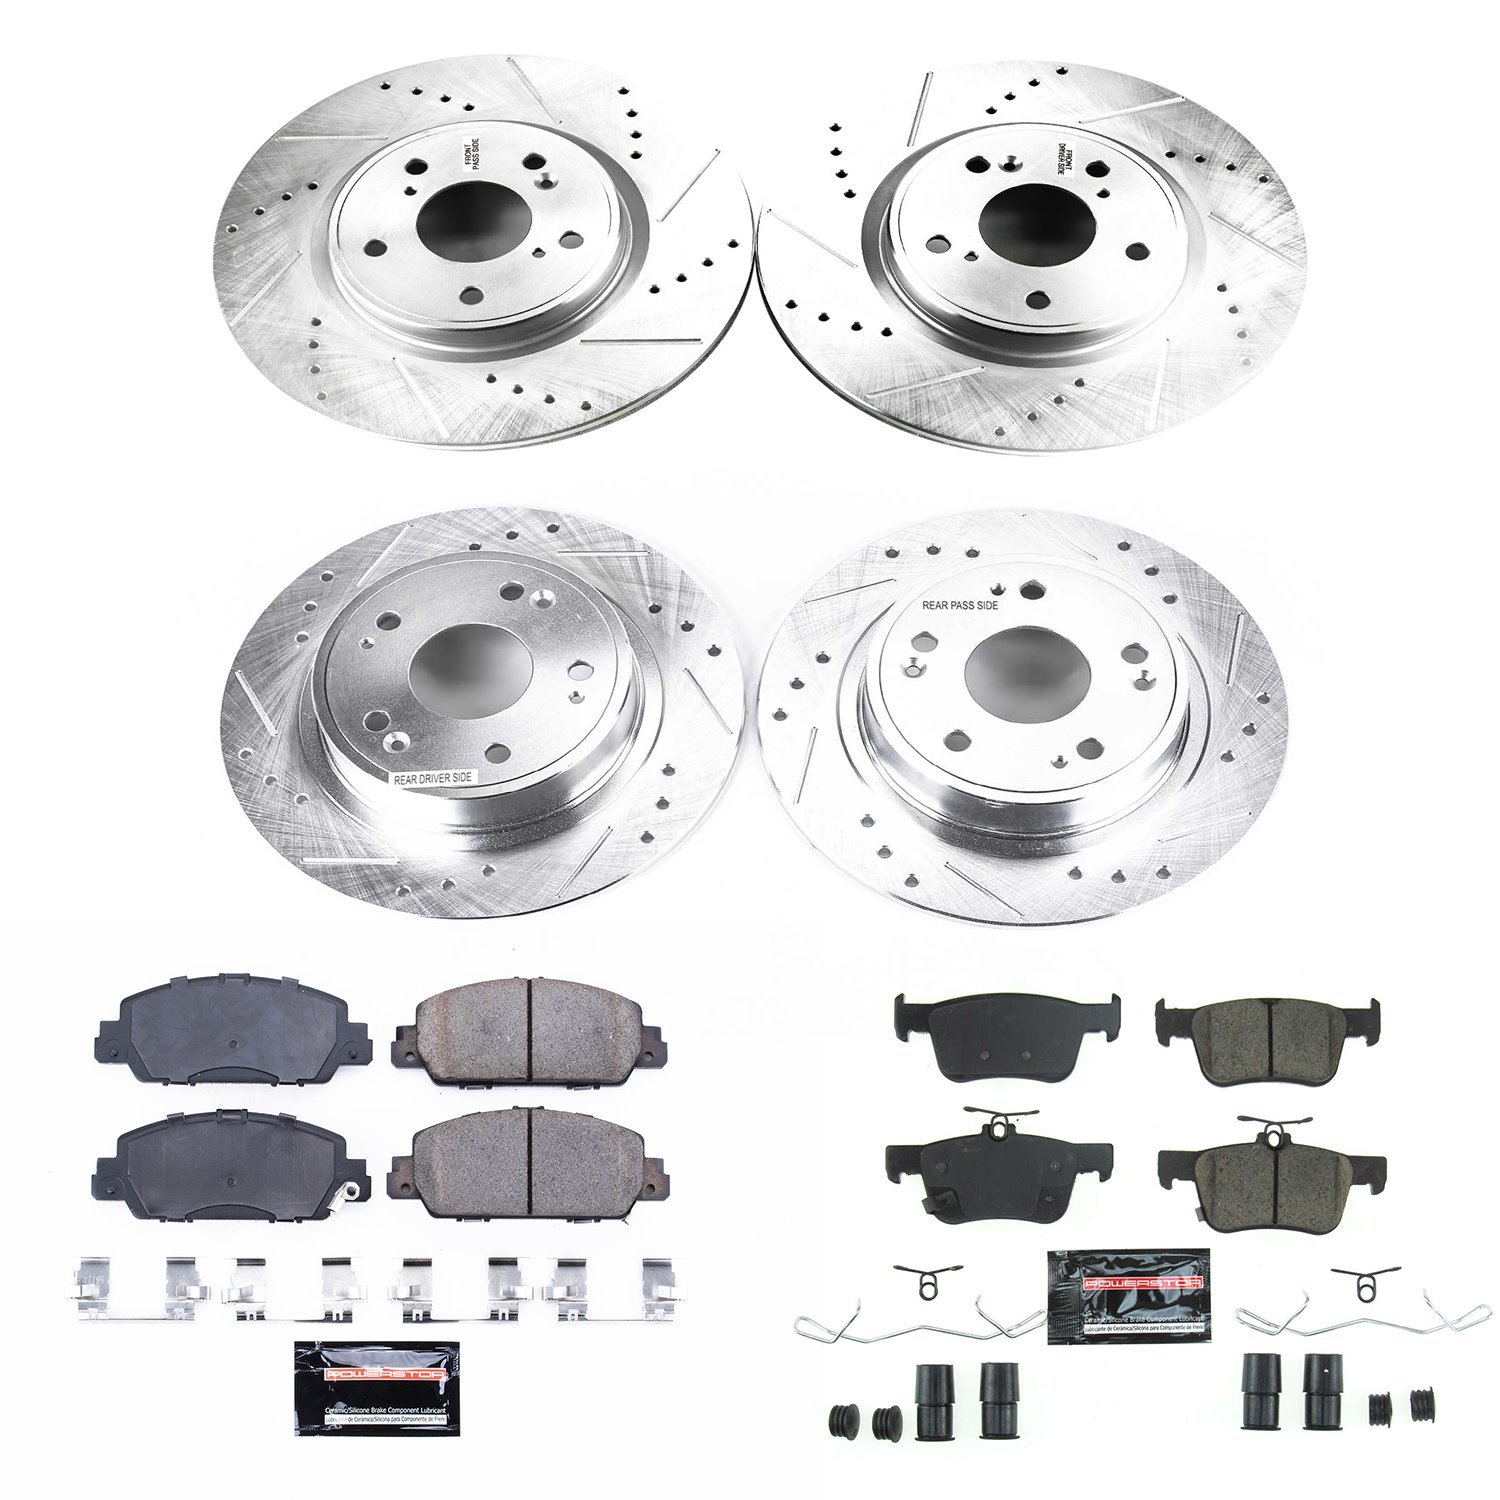 Z23 Evolution Sport Front and Rear Brake Pads & Rotor Kit Fits Late Model Honda Accord